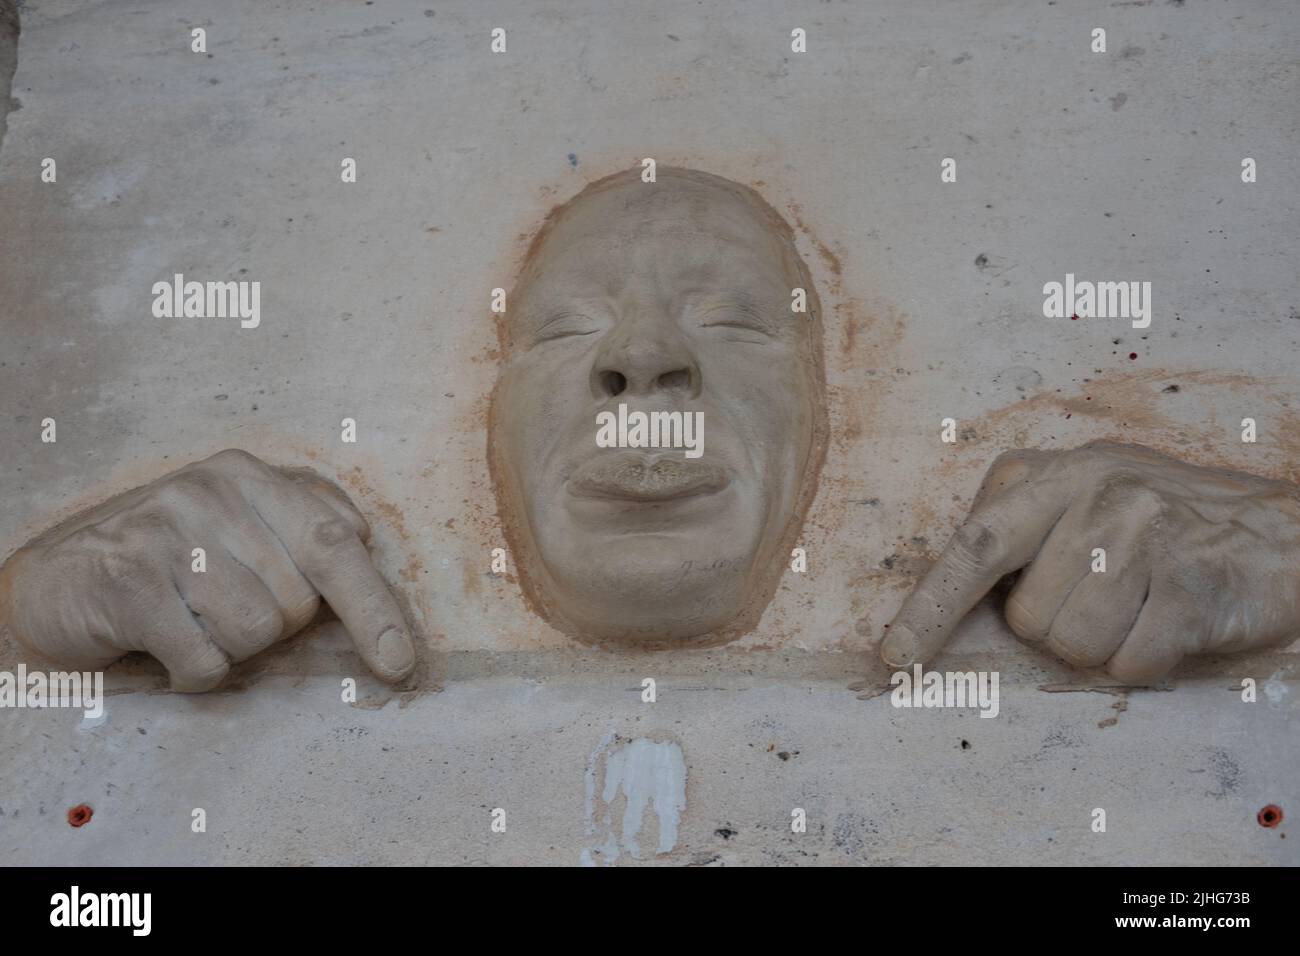 Stone carving on a fat face with pouting lips and hands with fingers pointing down Paris Francw Stock Photo